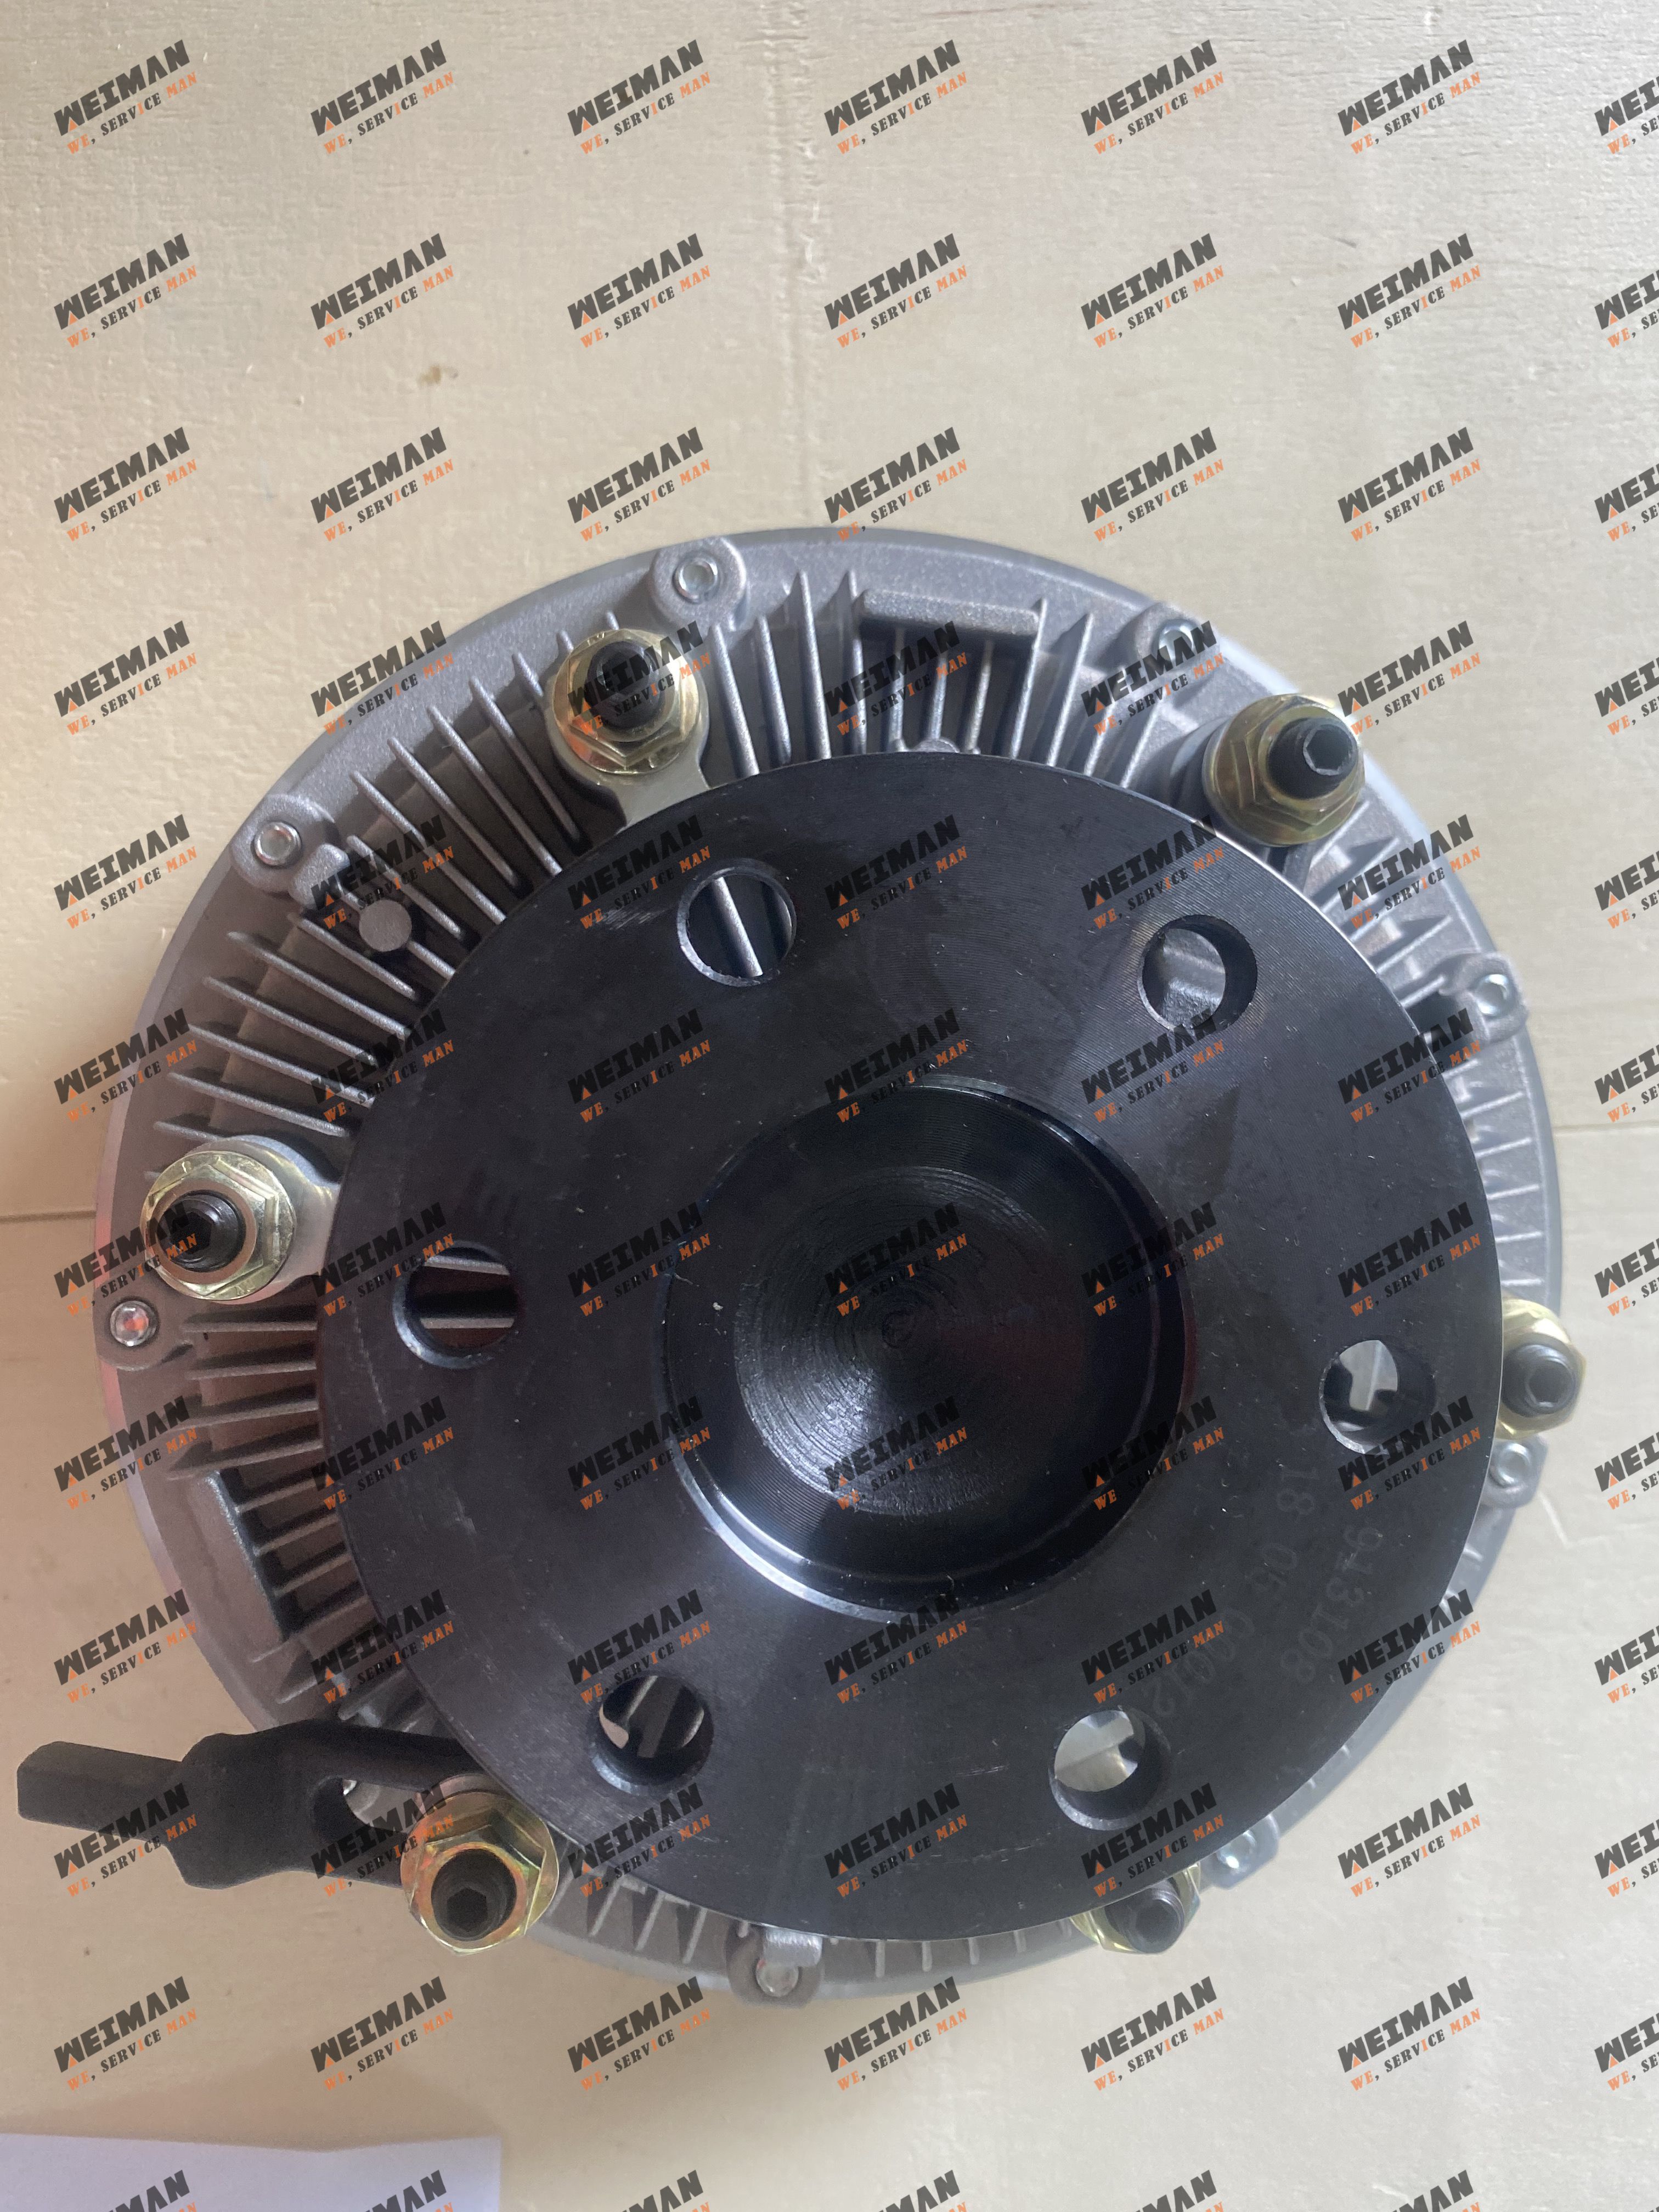 Engine fan clutch for RS8140 ROAD ROLLER 4110000909030